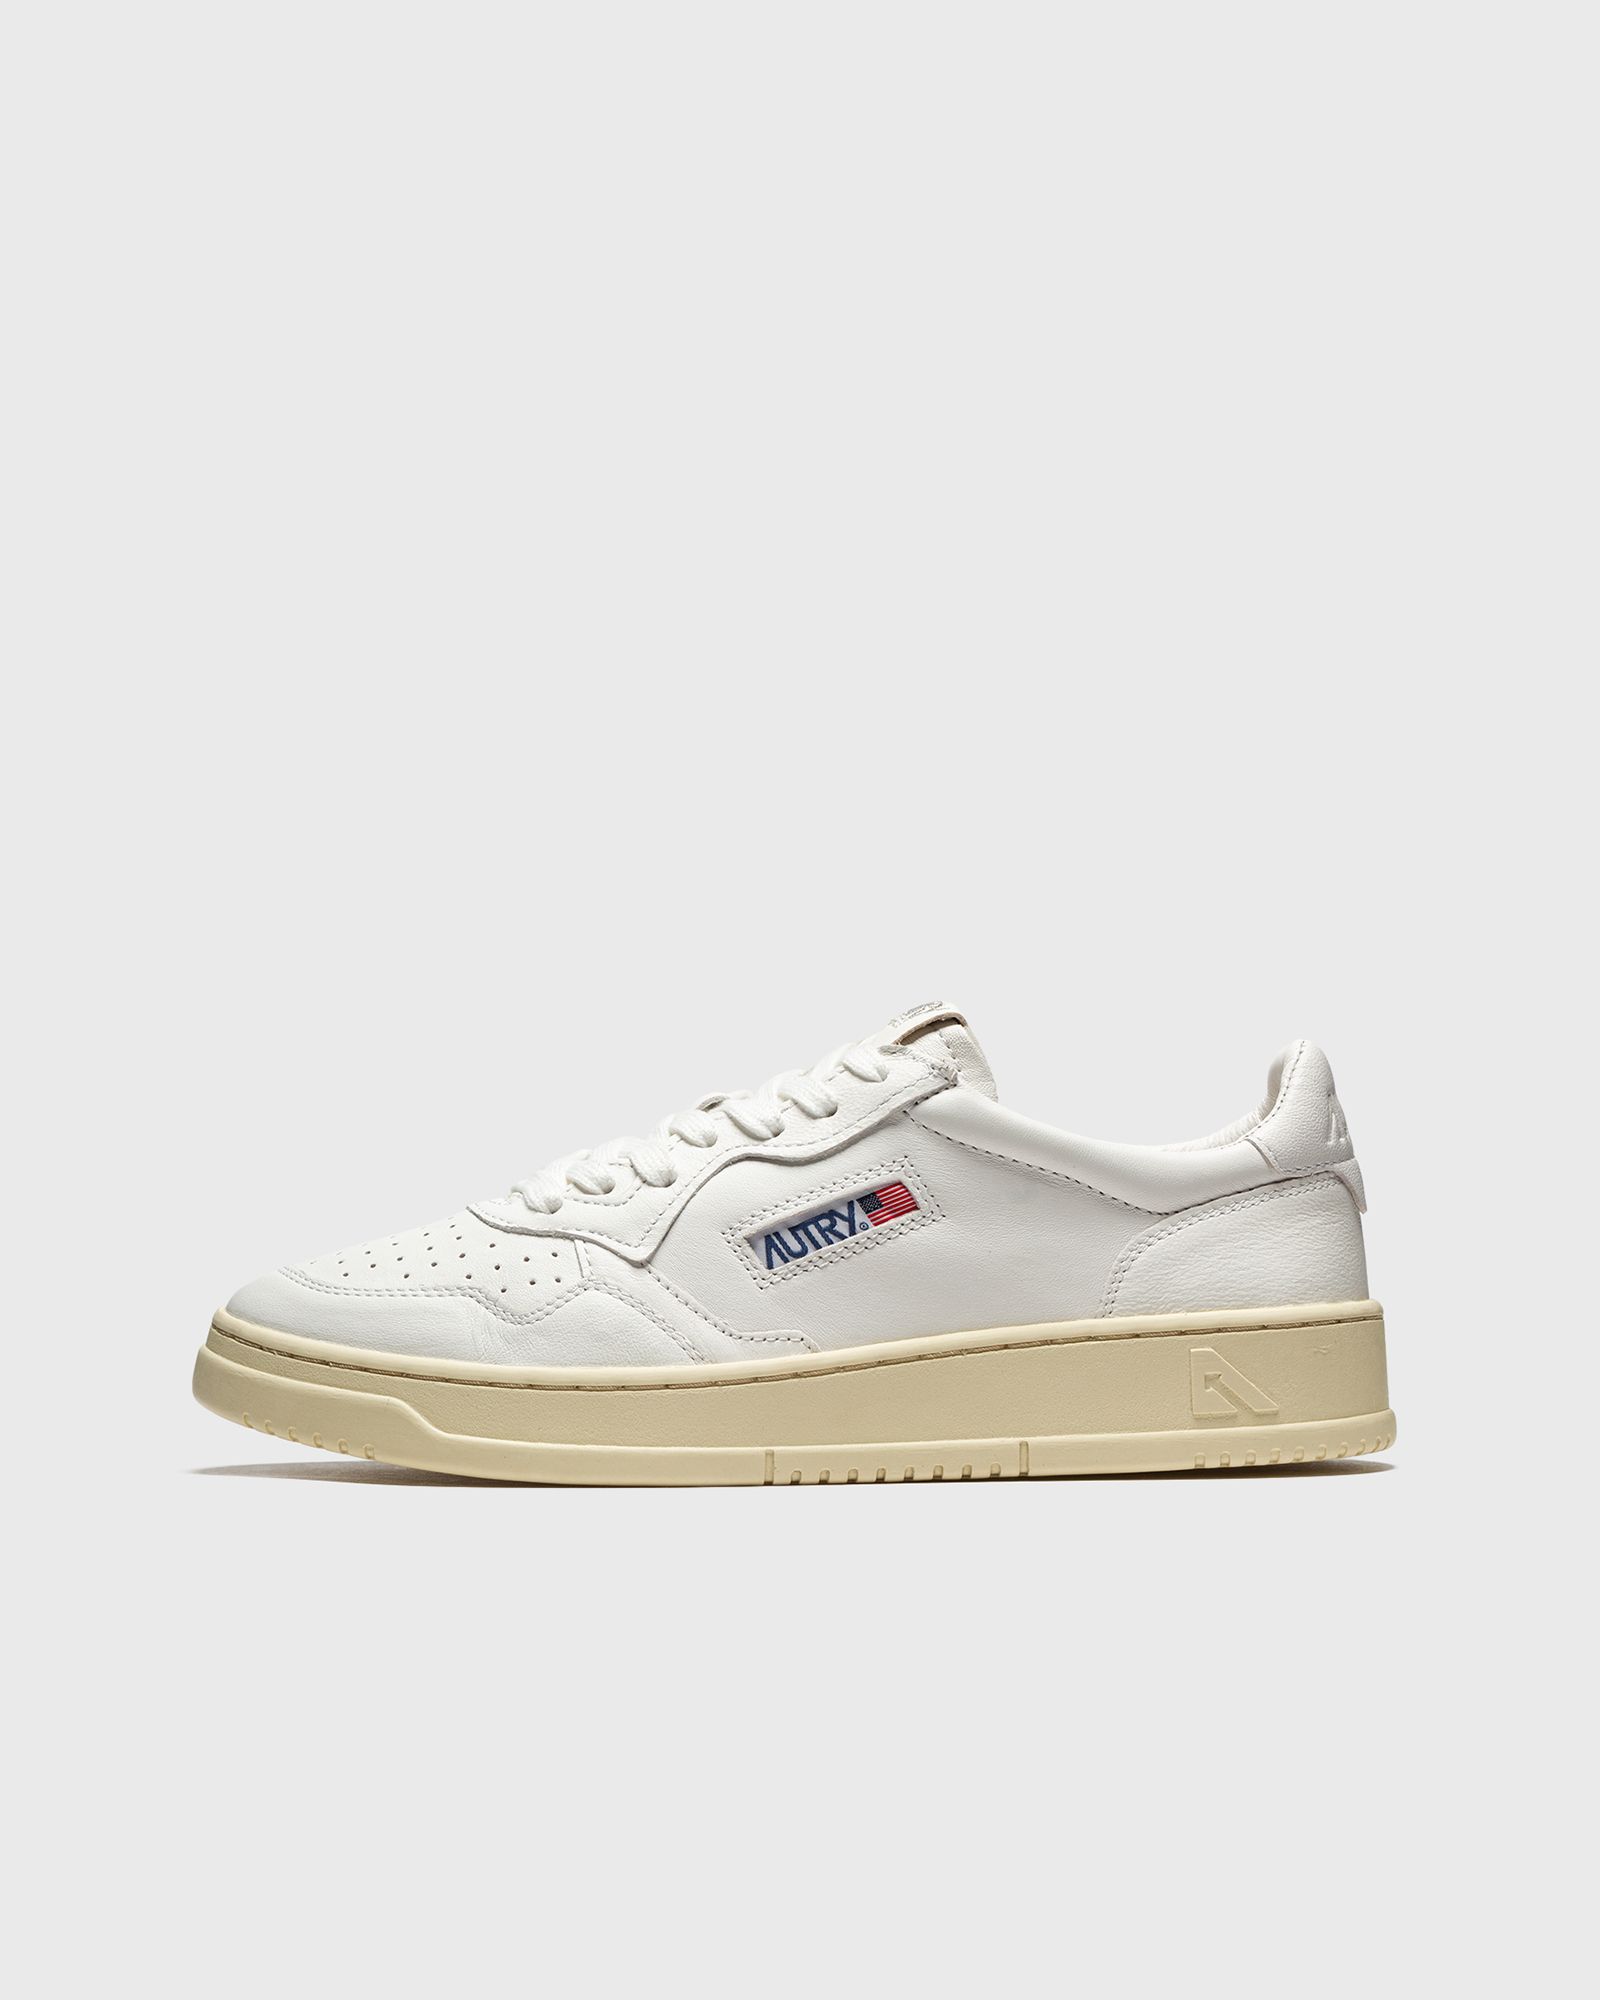 Autry Action Shoes AUTRY 01 LOW WOM women Lowtop white in Größe:39 von Autry Action Shoes